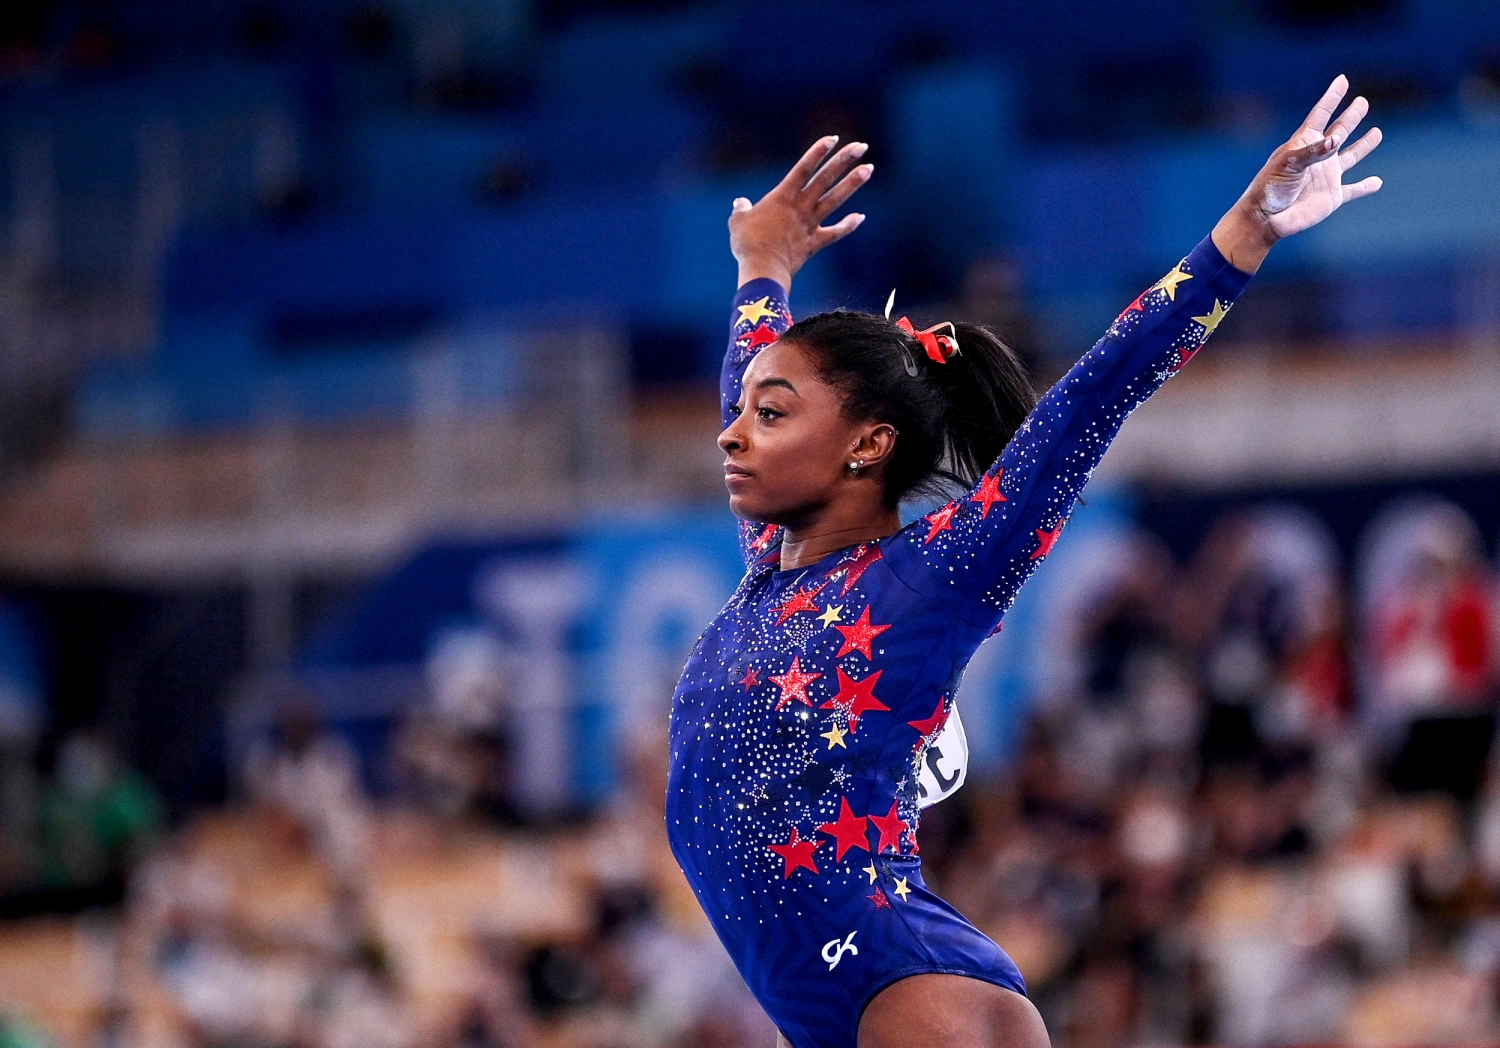 Simone Biles has a condition that affects her balance and spatial awareness. What is it called?